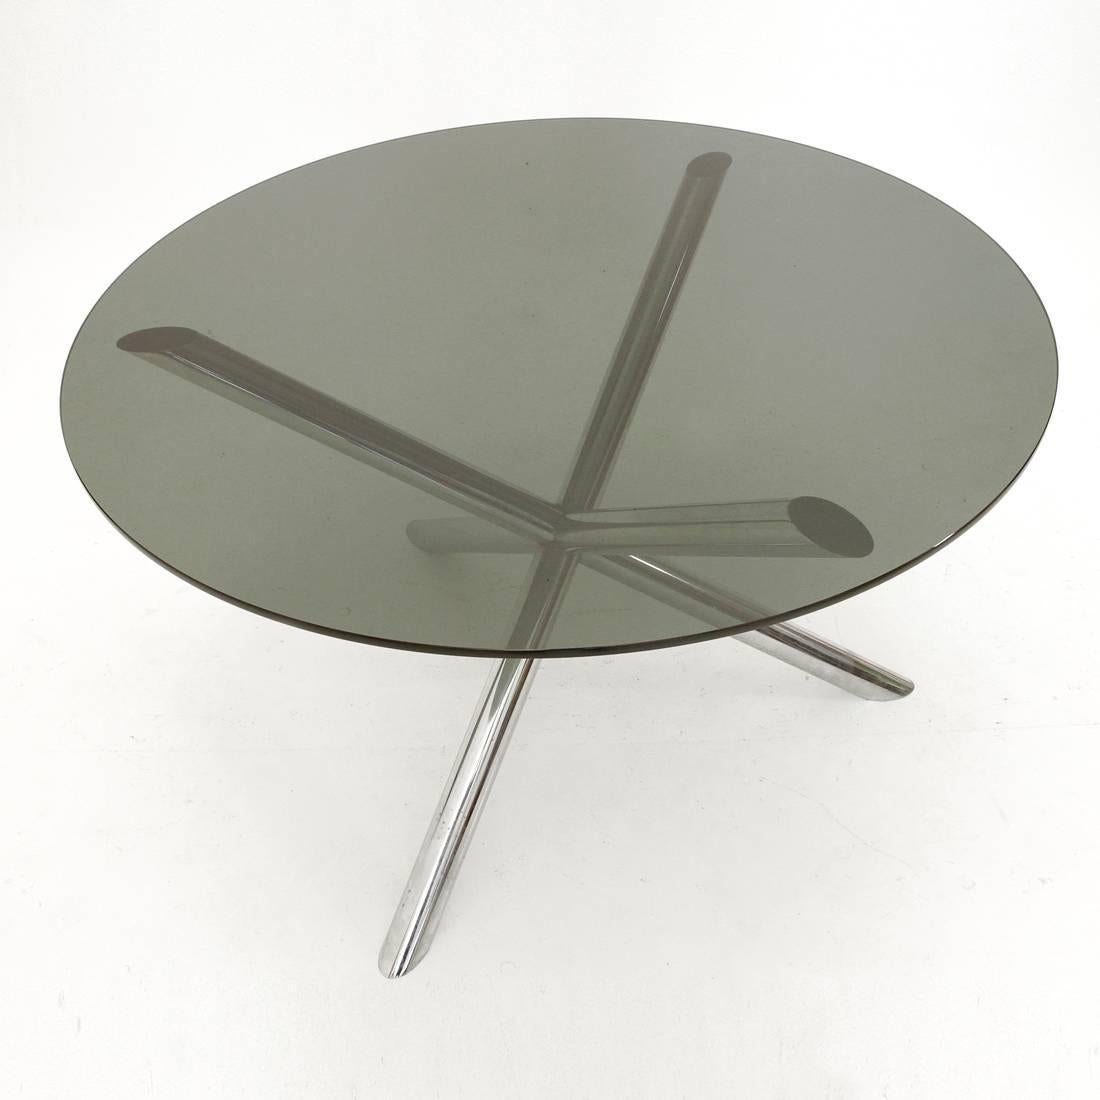 This dining table was produced in France in the 1970s. It has a chromed metal base, three chromed tubular steel bars, with a smoked glass round tabletop.